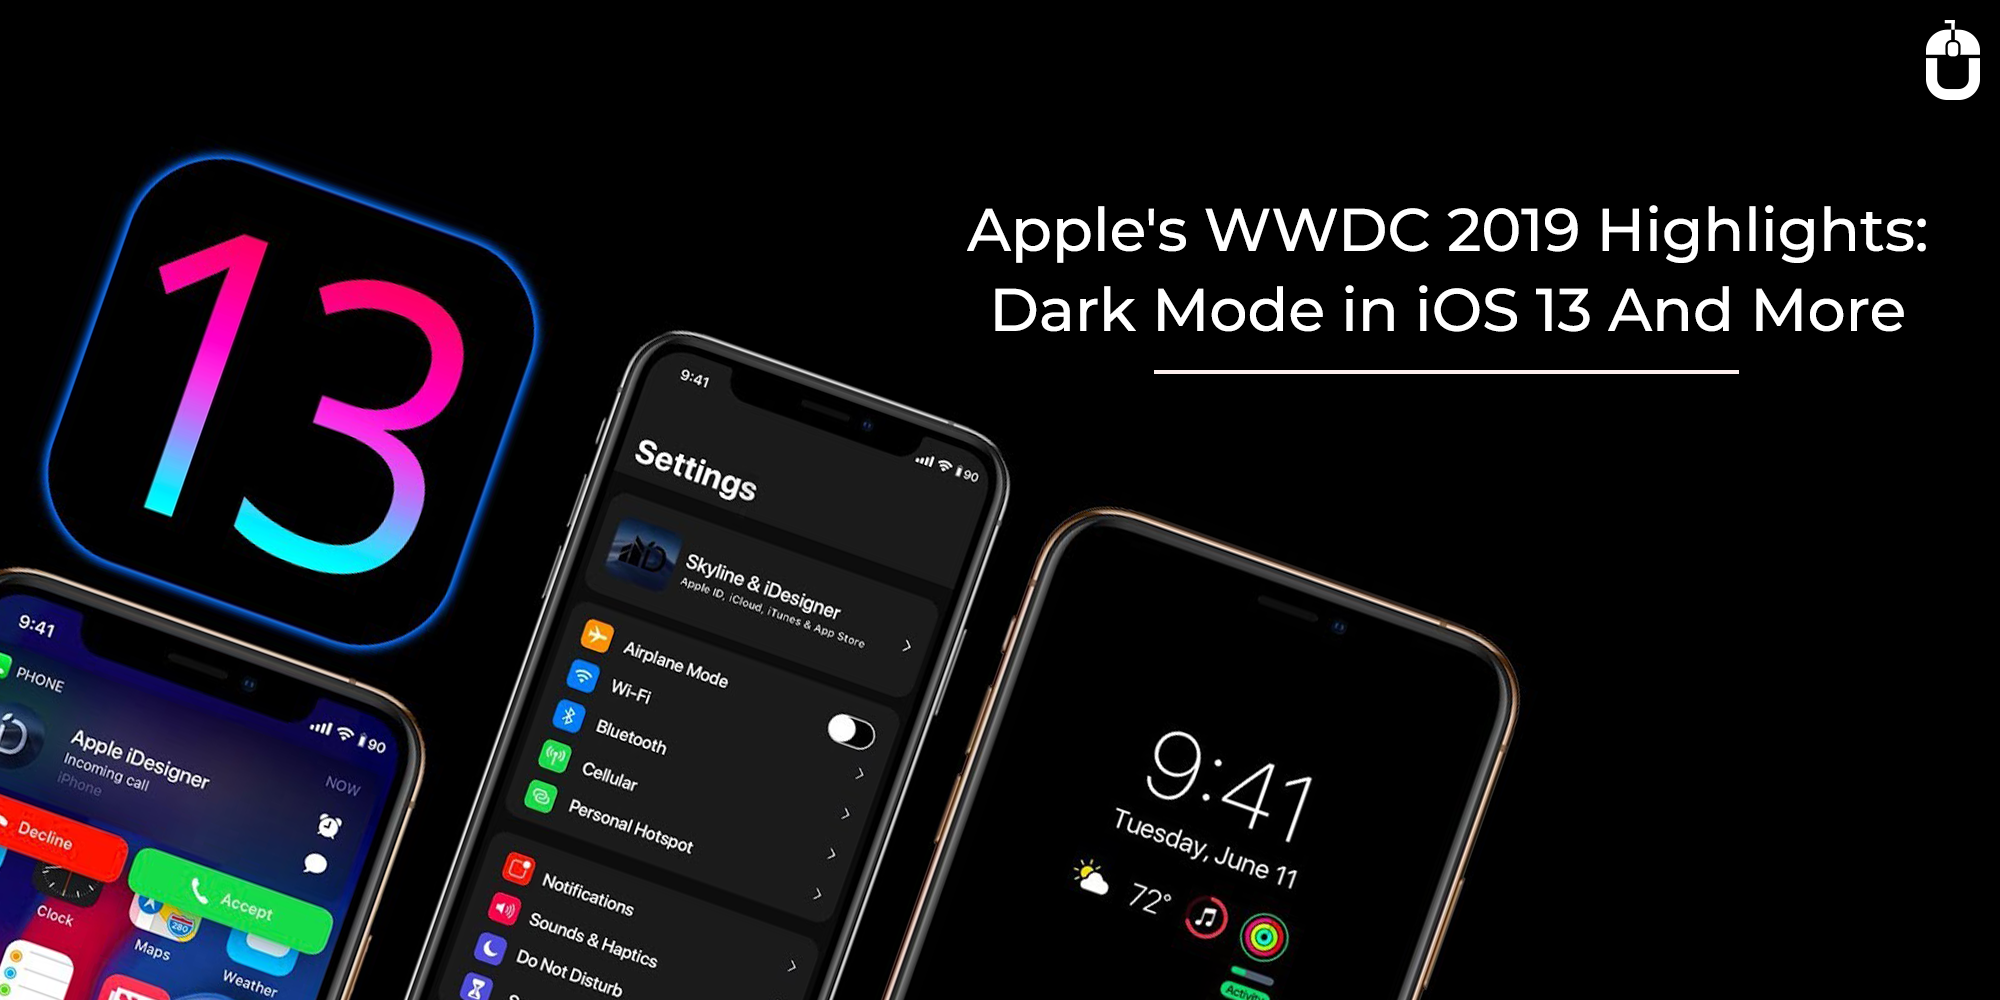 Apple’s WWDC 2019 Highlights: Dark Mode In iOS 13 And More